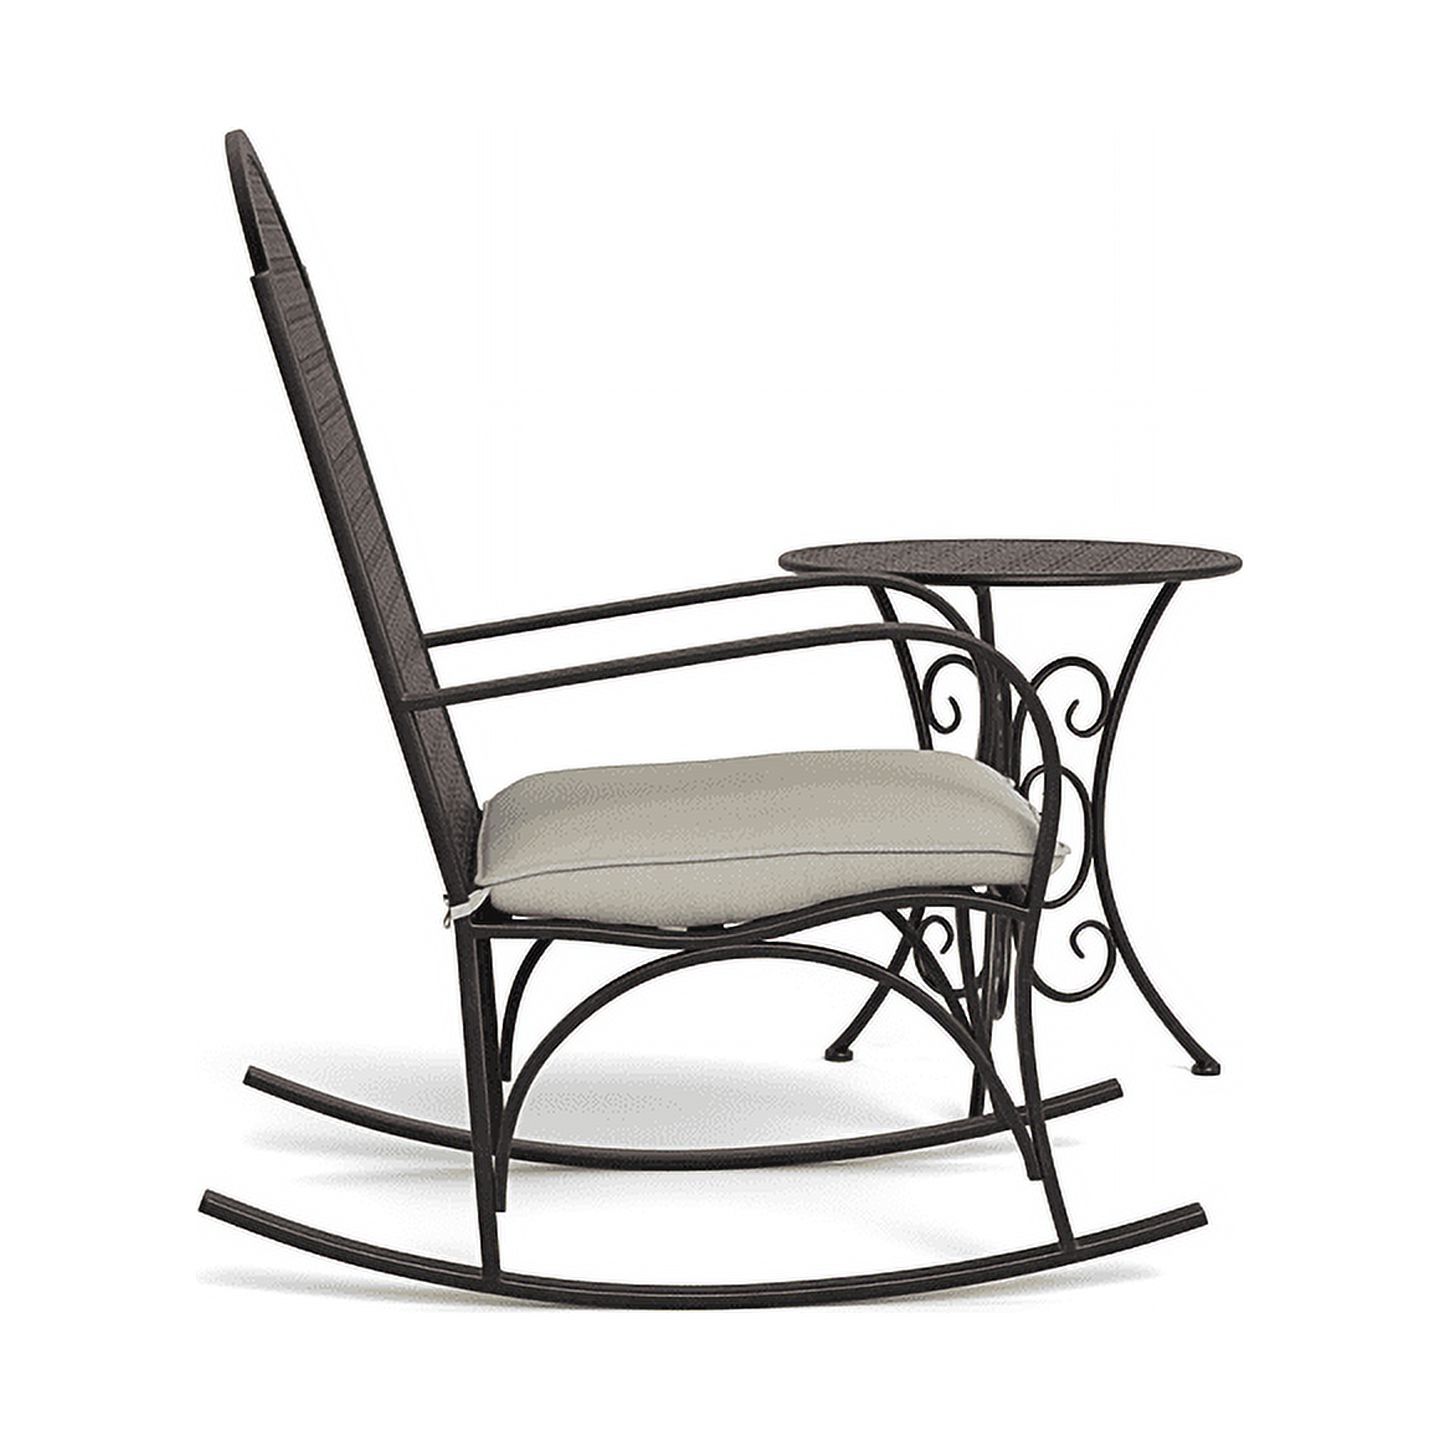 Tortuga Outdoor Garden Rocking Chair with Side Table - Oiled Copper Finish, Beige Cushion - image 3 of 11